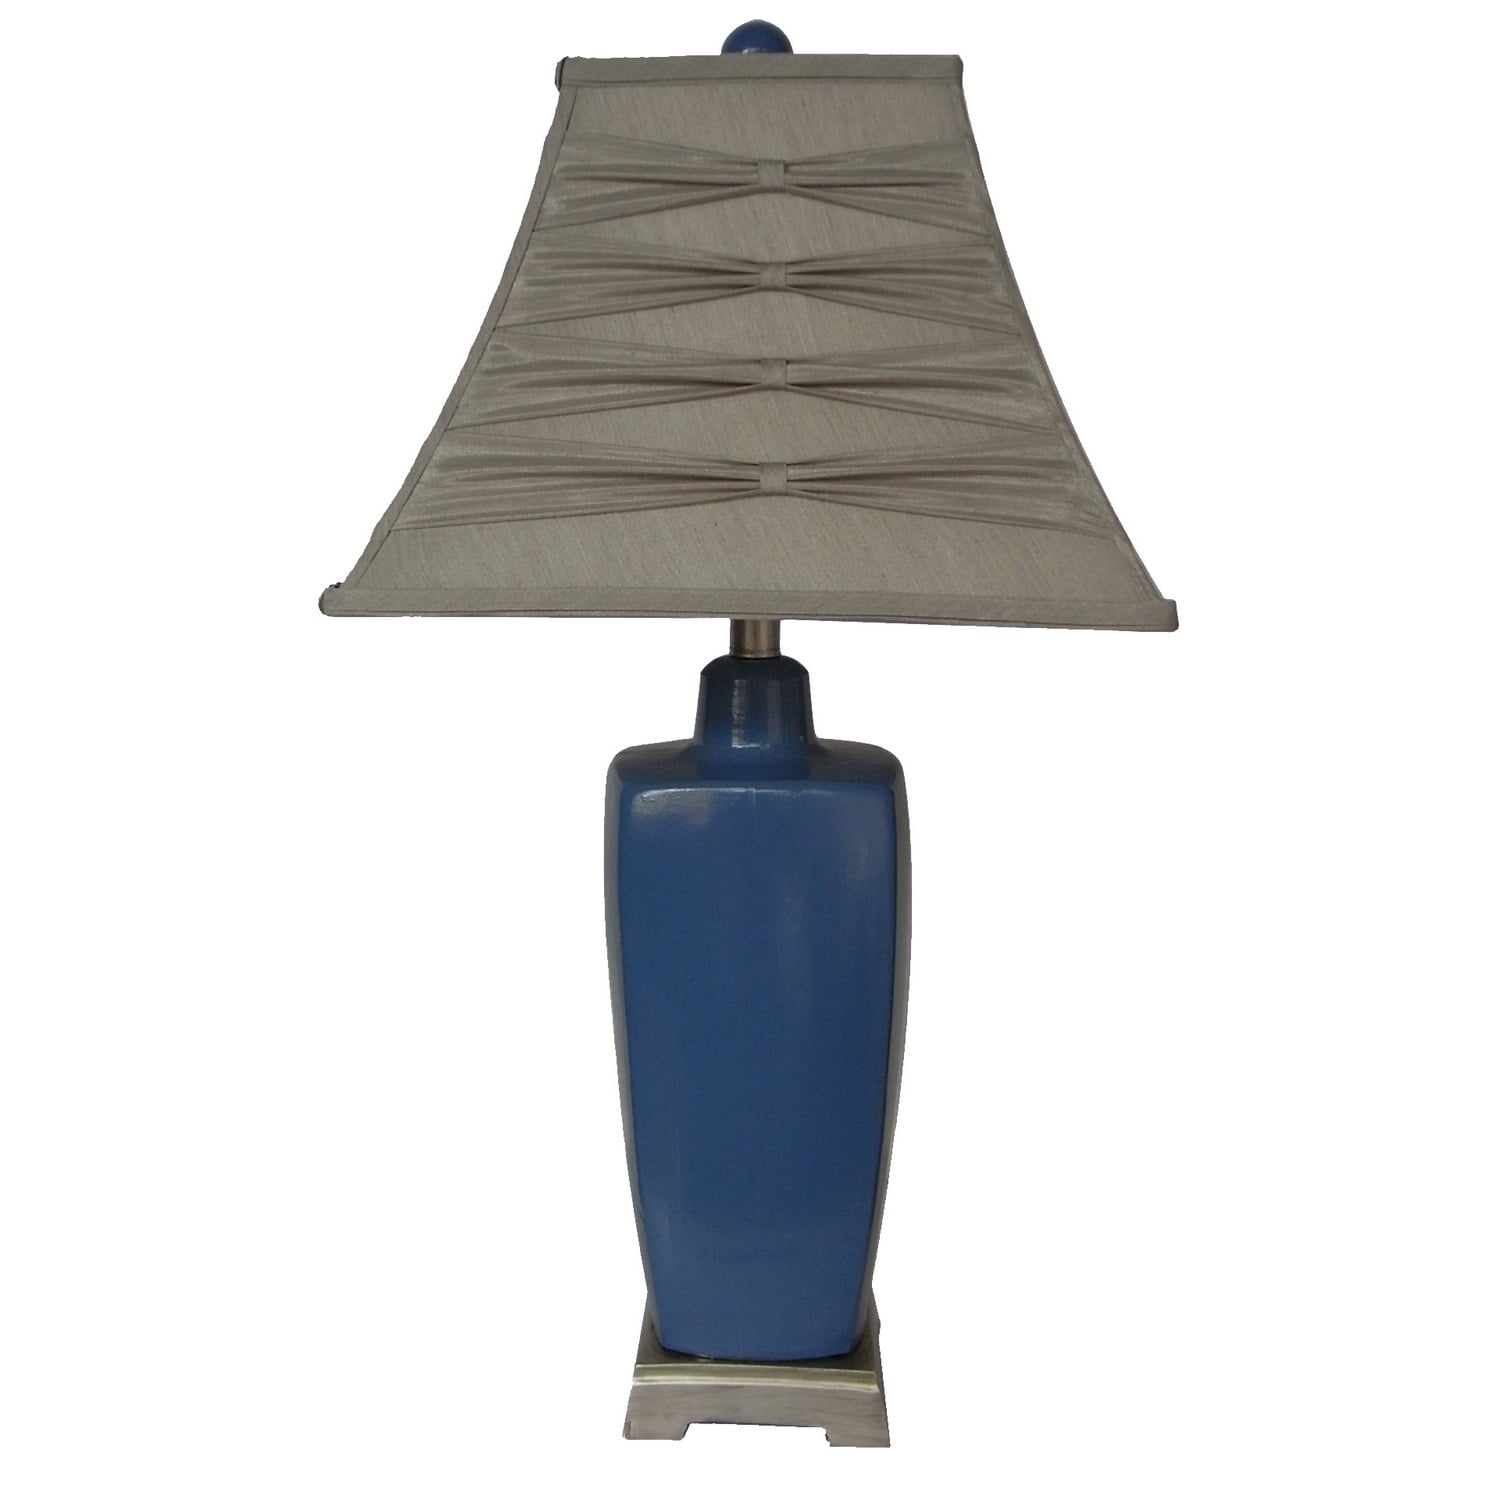 Integrity 29 inch Reactive Blue Glaze Ceramic Table Lamp (BlueMaterials CeramicDimensions 29 inches high x 20 inches wide x 22 inches deep )